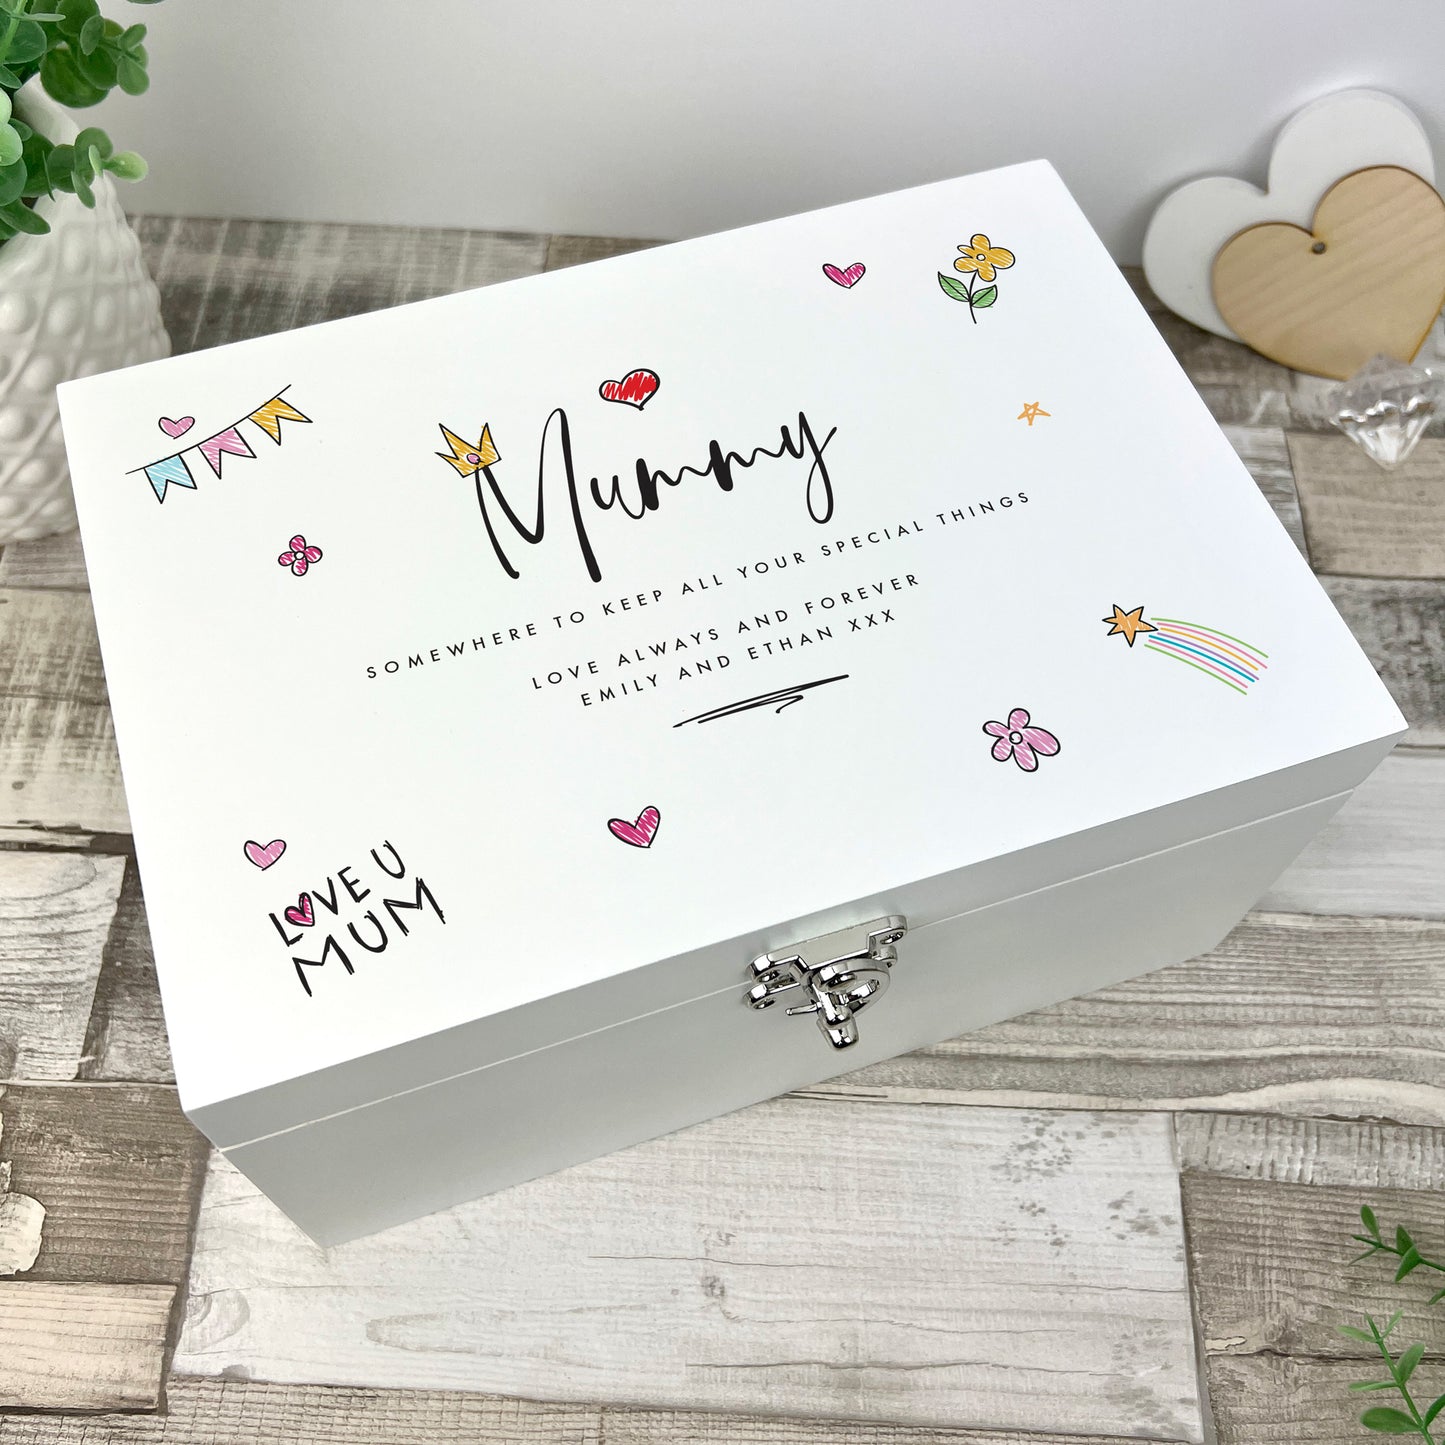 Personalised Mother's Day 'From The Kids' White Luxury Memory Box - 3 Sizes (22cm | 27cm | 30cm)